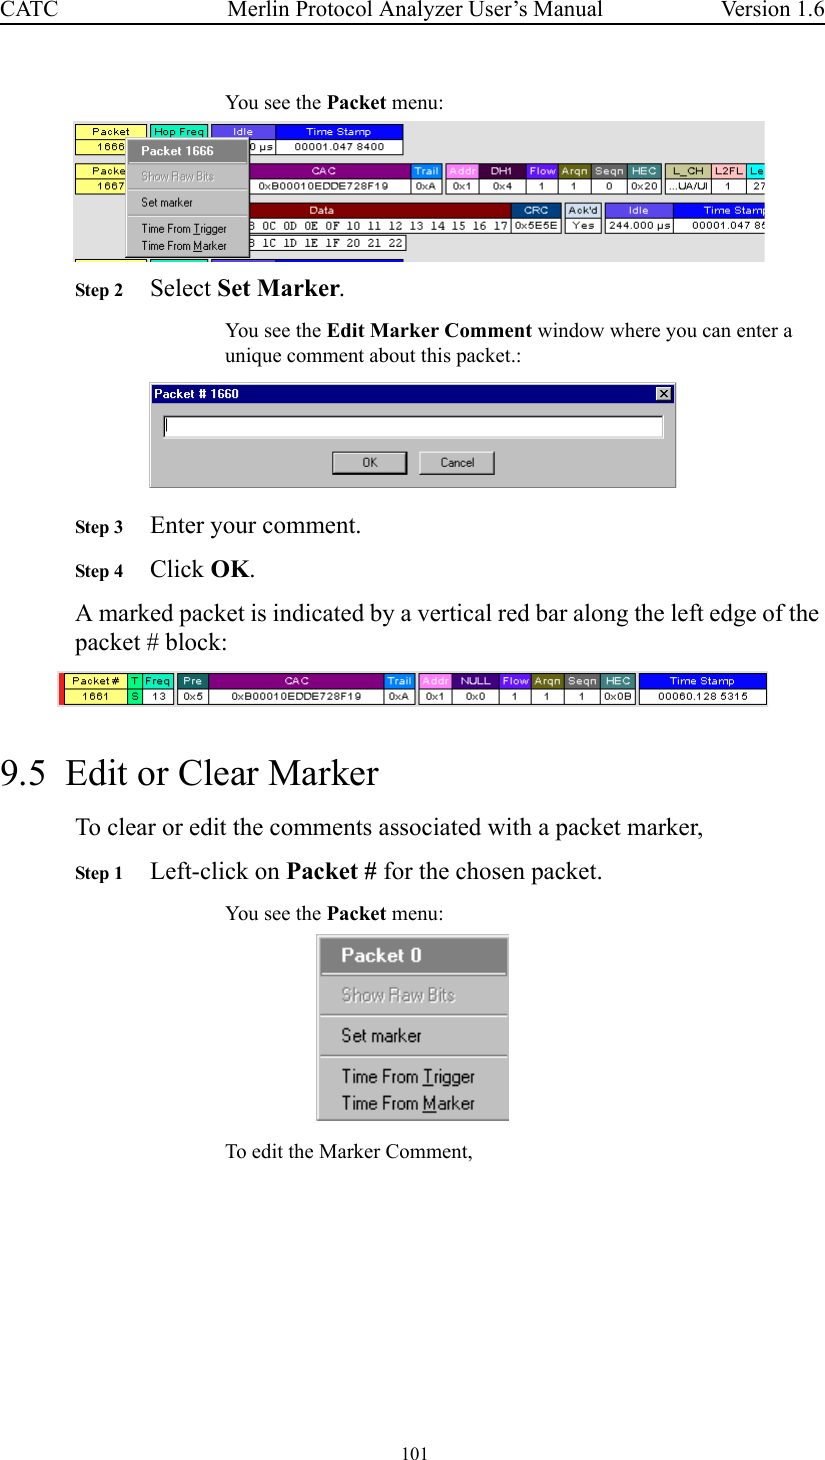  101 Merlin Protocol Analyzer User’s ManualCATC Version 1.6You see the Packet menu:Step 2 Select Set Marker.You see the Edit Marker Comment window where you can enter a unique comment about this packet.:Step 3 Enter your comment. Step 4 Click OK.A marked packet is indicated by a vertical red bar along the left edge of the packet # block: 9.5  Edit or Clear MarkerTo clear or edit the comments associated with a packet marker,Step 1 Left-click on Packet # for the chosen packet.You see the Packet menu:To edit the Marker Comment,